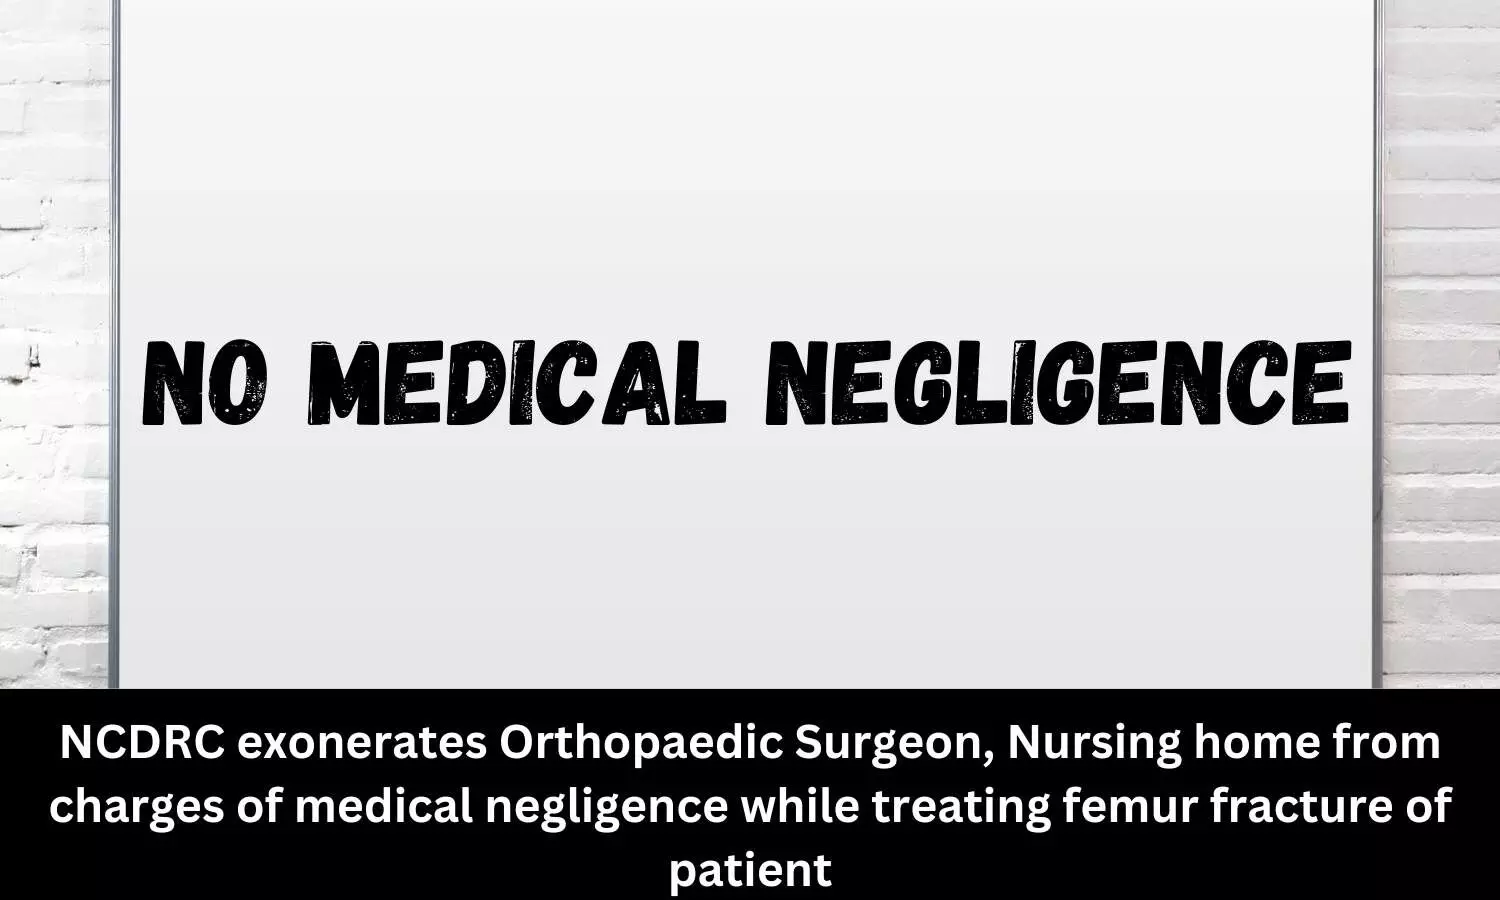 NCDRC exonerates Orthopaedic Surgeon, Nursing home from charges of medical negligence while treating femur fracture of patient